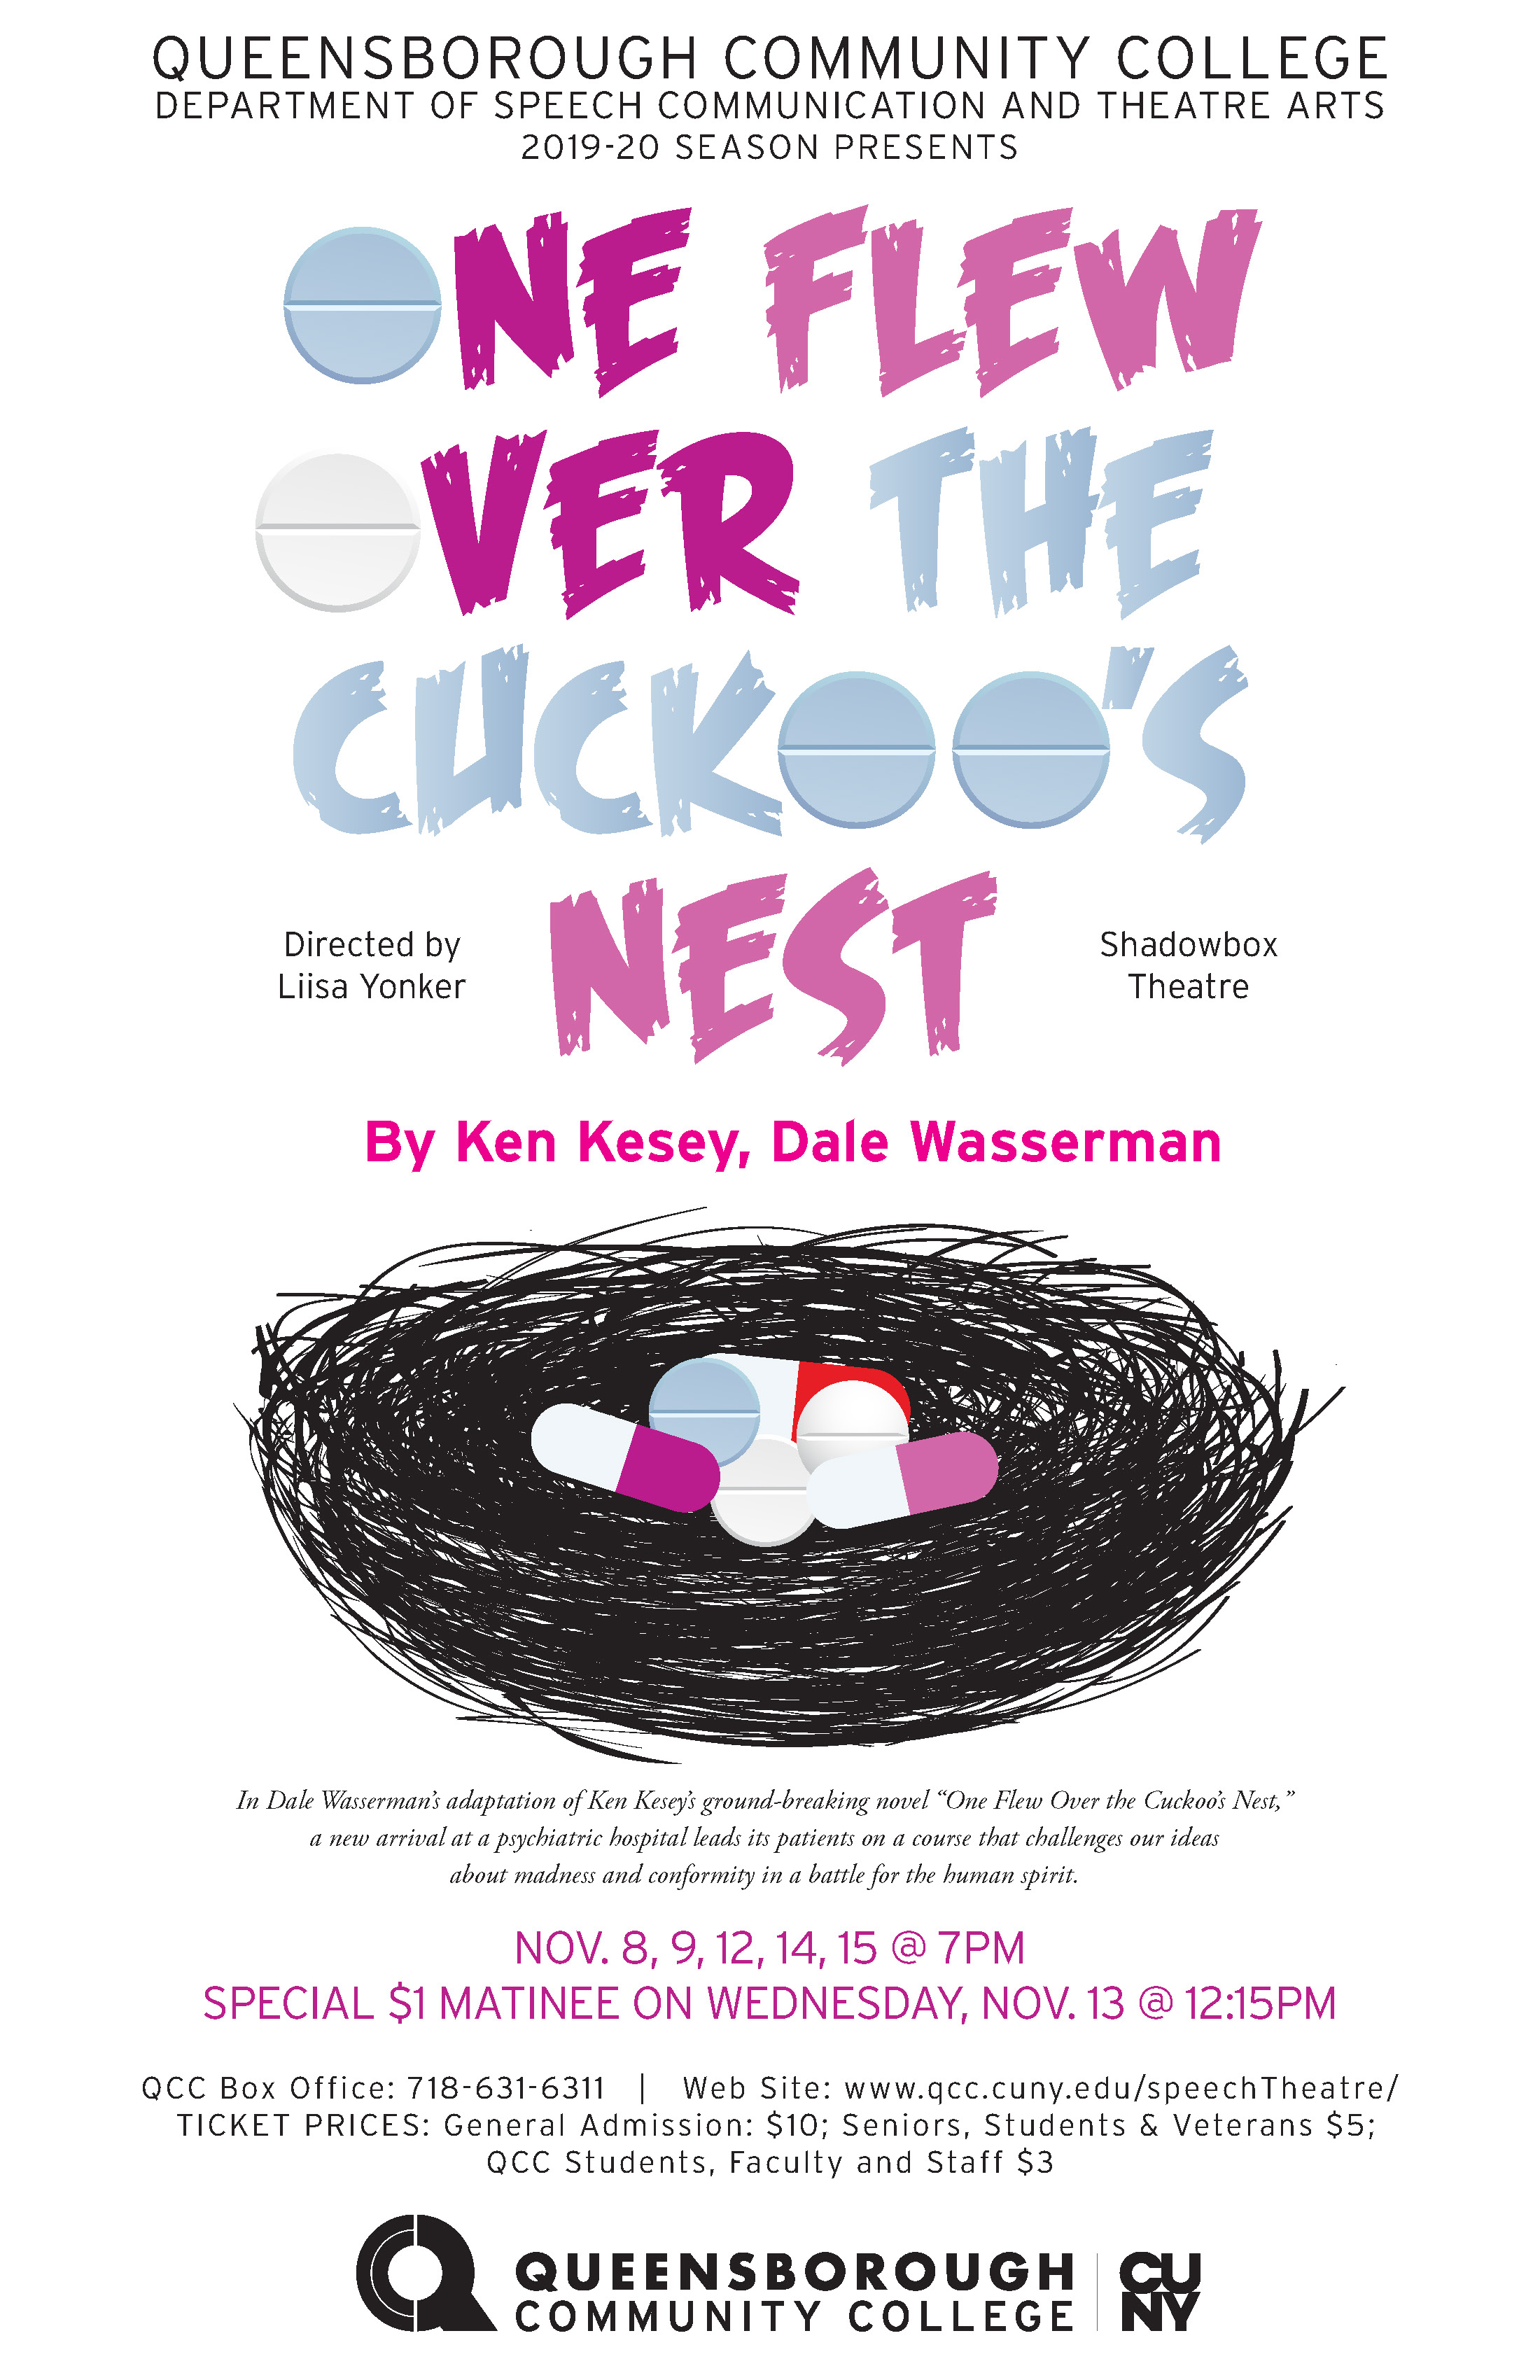 This is a poster for the fall 2019 production of ‘One Flew Over the Cuckoo’s Nest’ by Ken Kesey and Dale Wasserman, and Directed by Professor Yonker. The poster displays various pills in a birds nest.